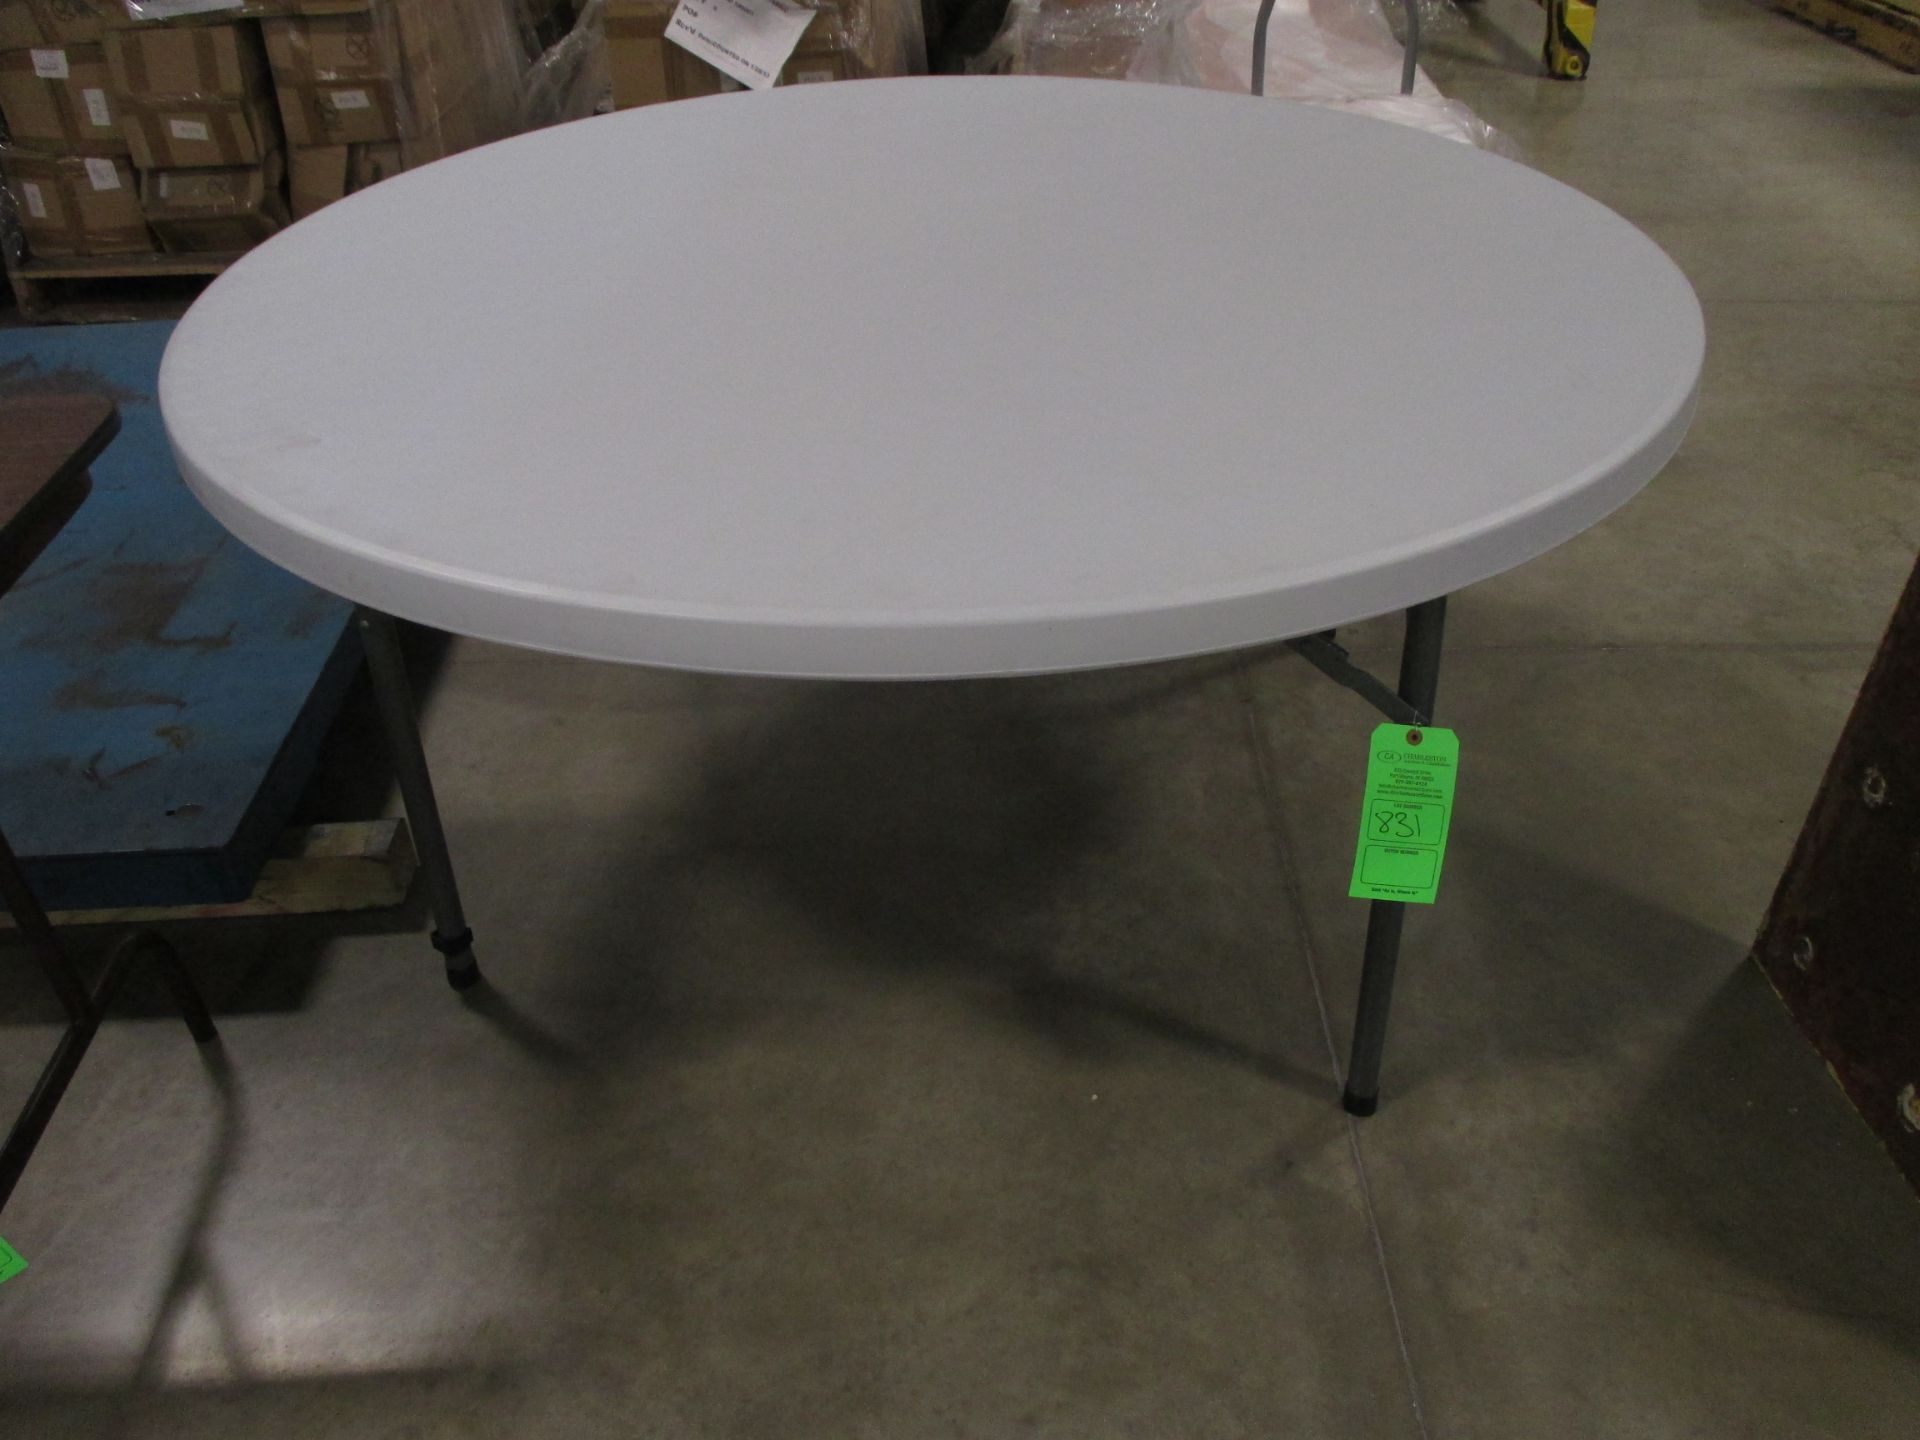 ROUND FOLD OUT TABLE(5373 STATE ROUTE 29 CELINA OH 45822-9210)